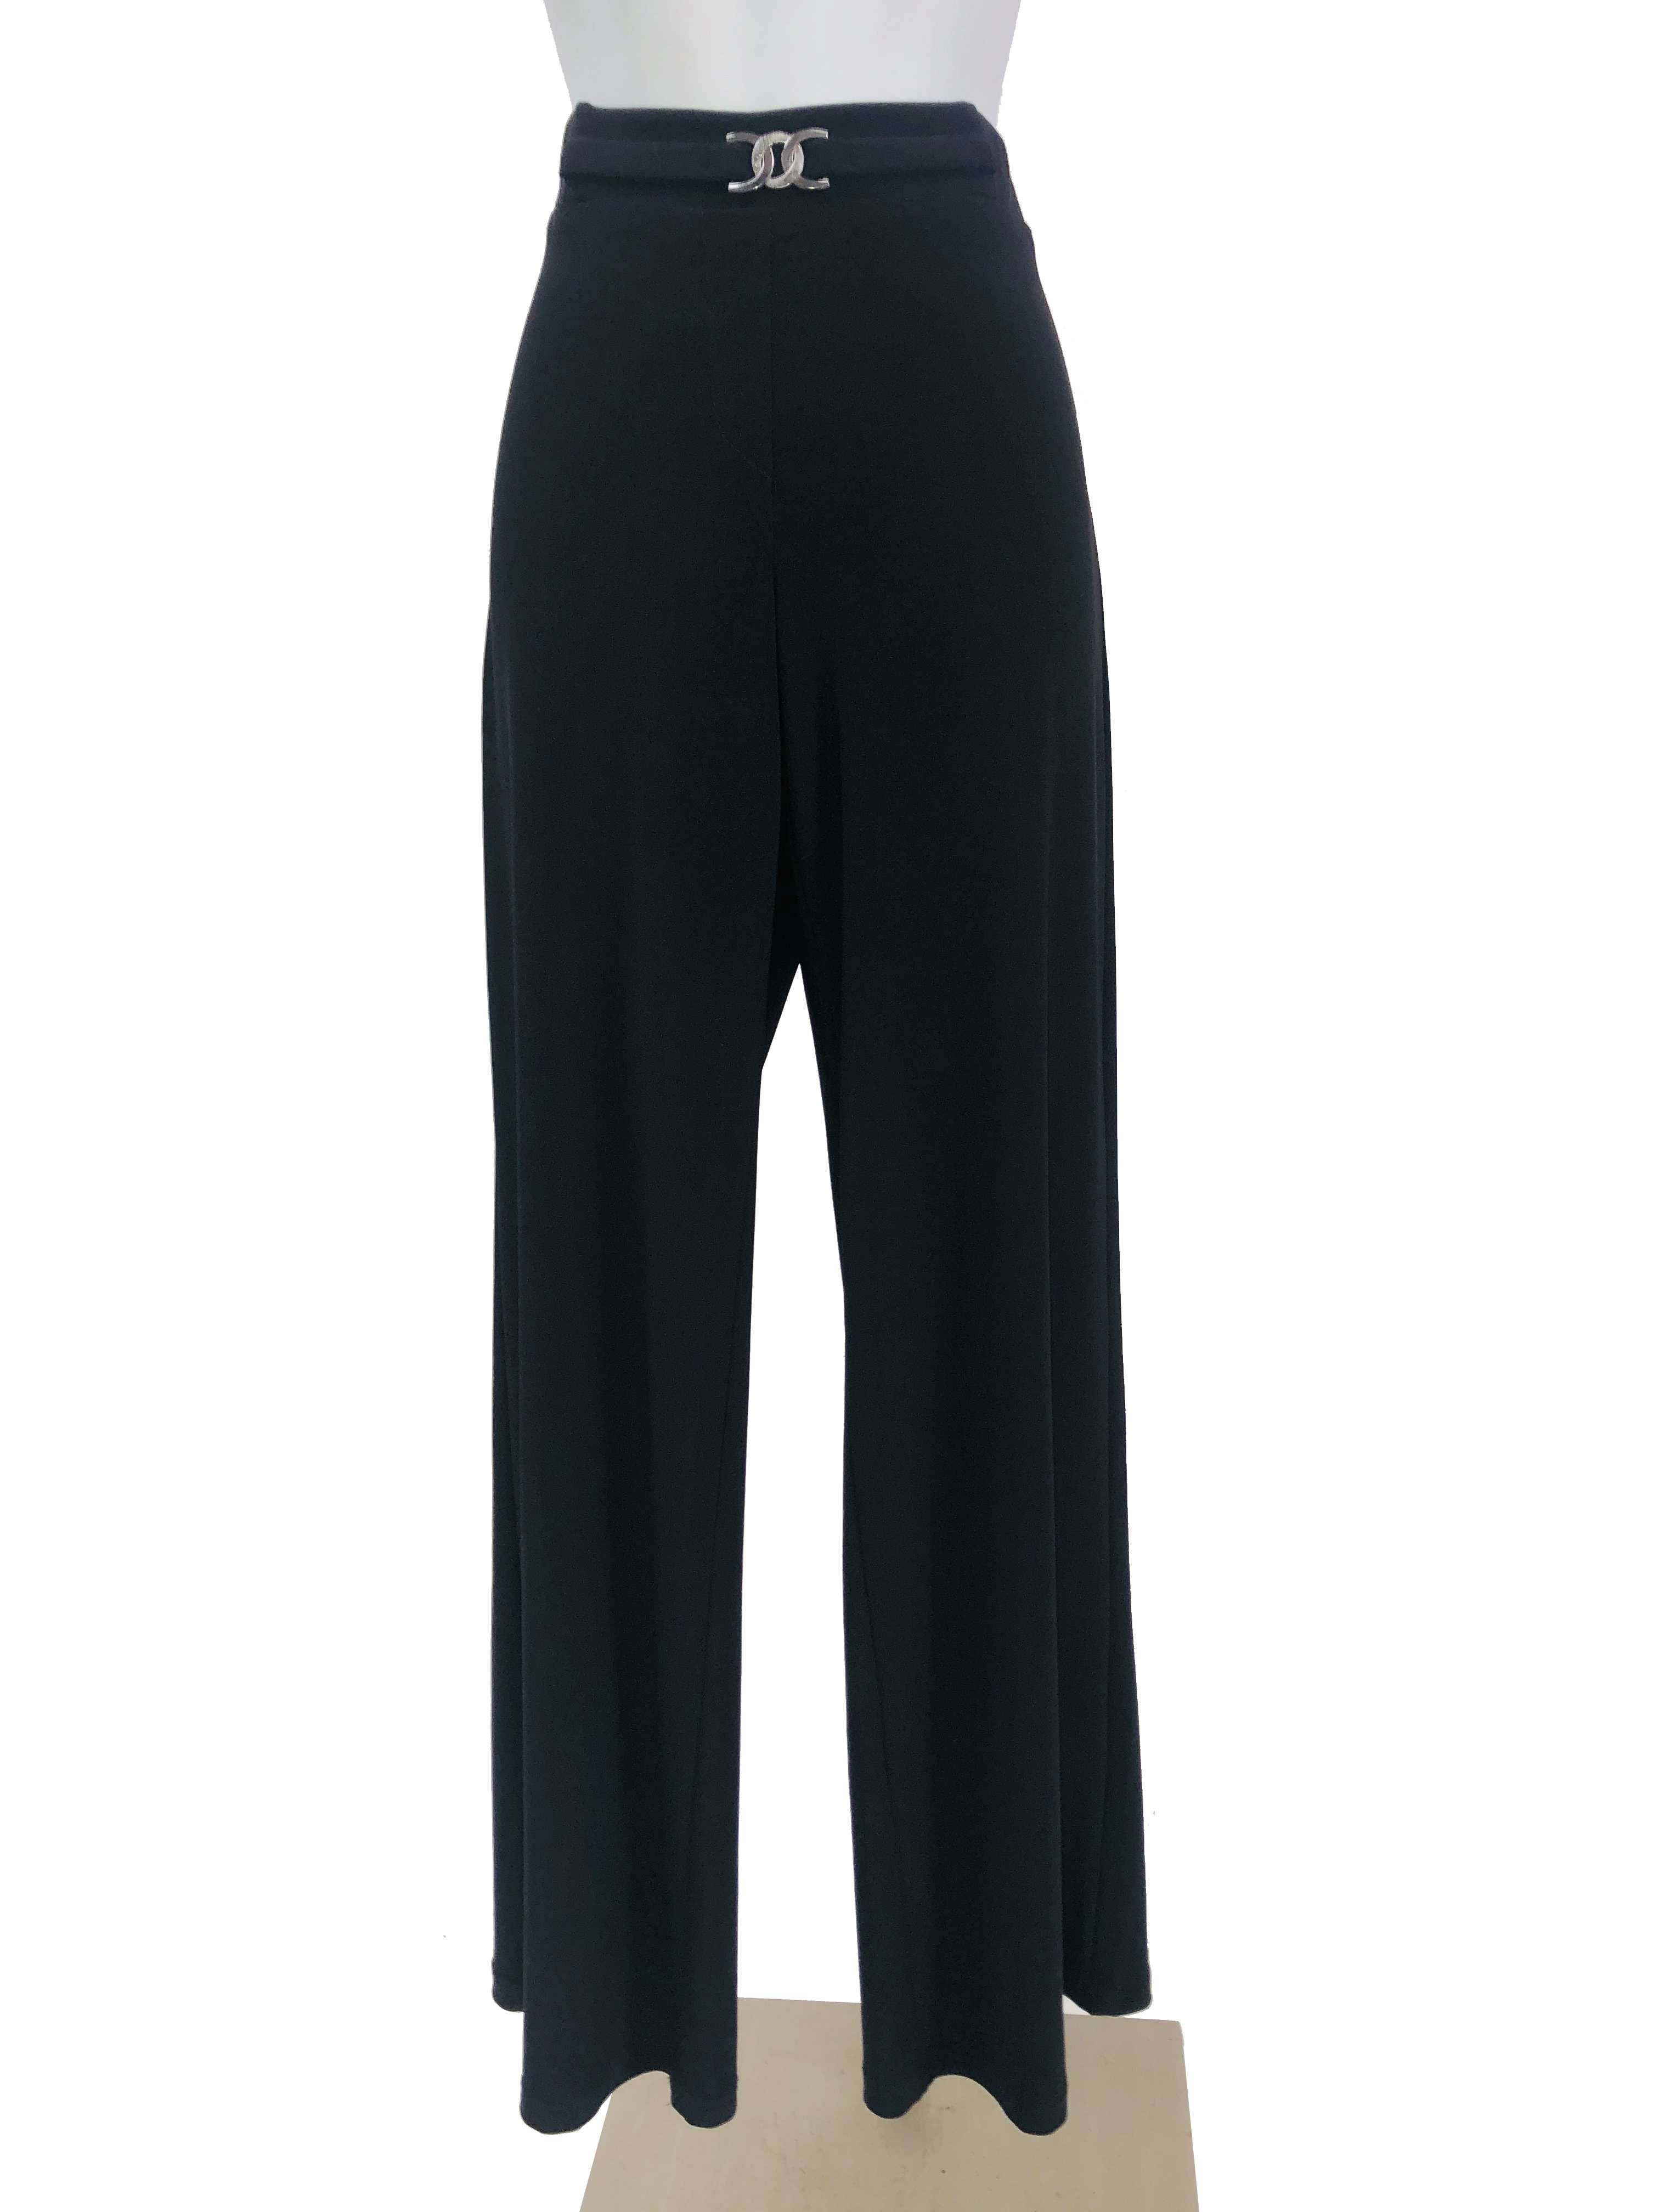 Women's Black Stretch Pants, Made In Canada, On Sale